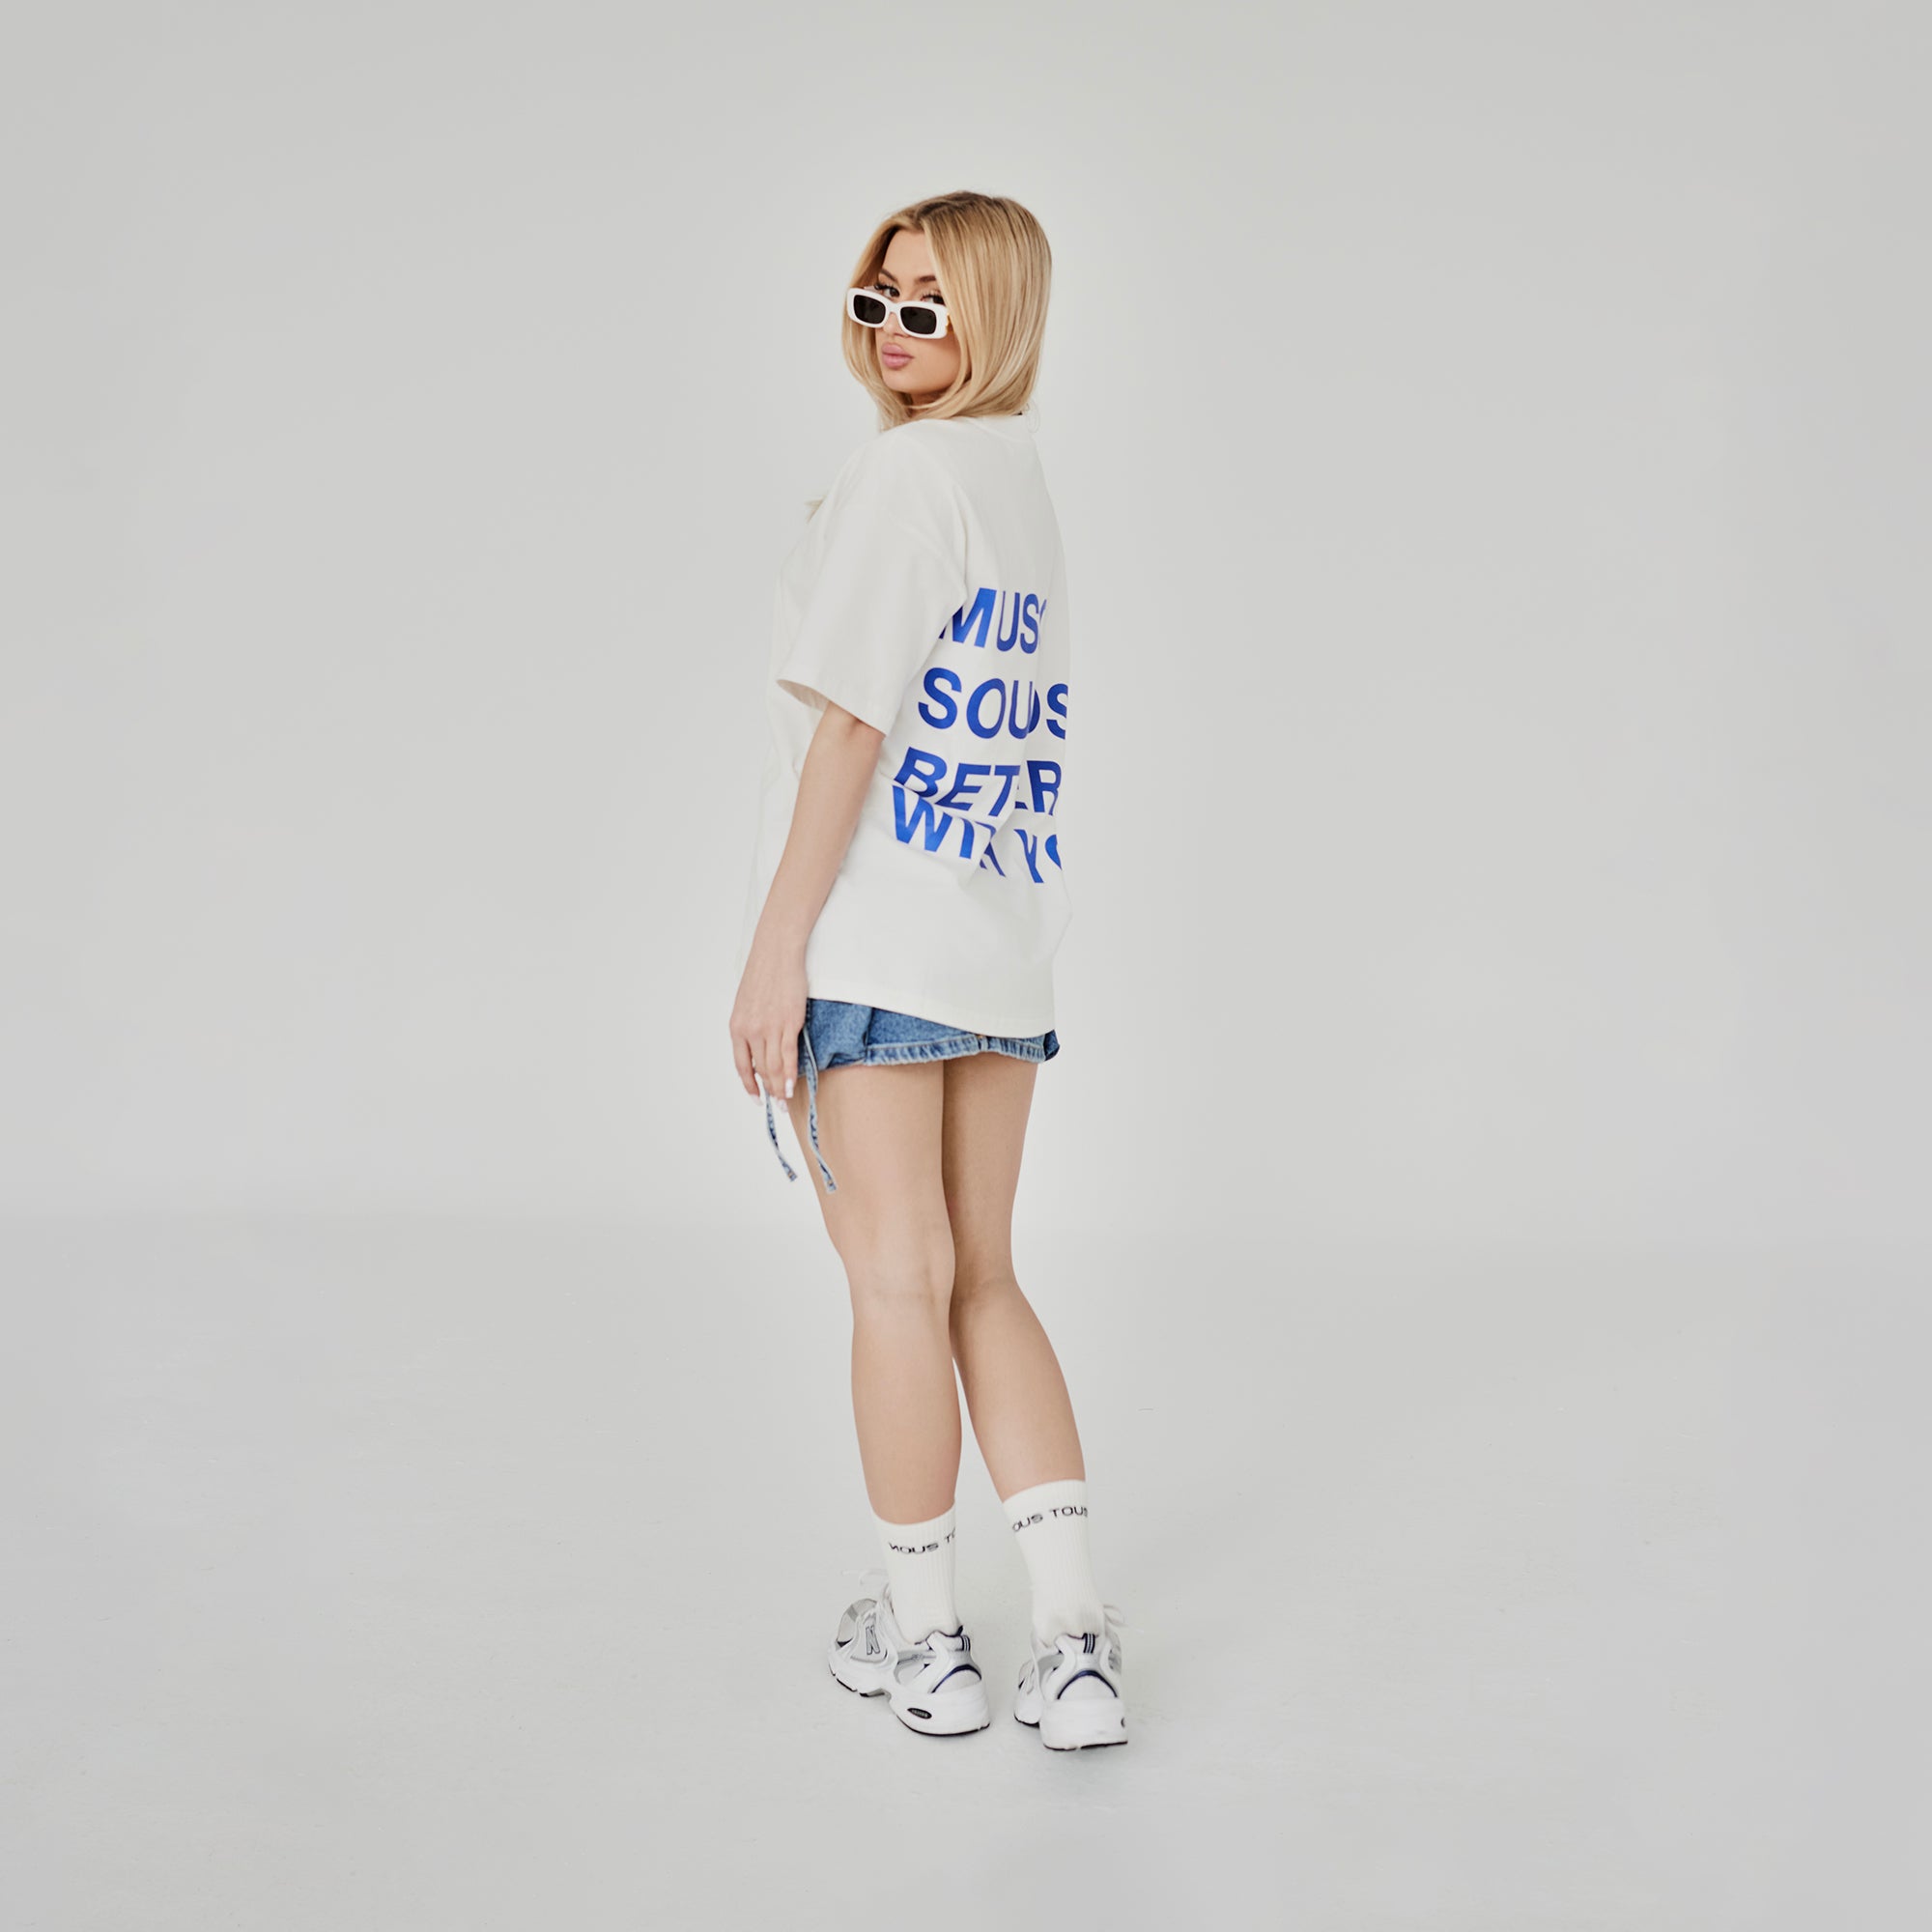 koszulka Music Souds better with you BLUE OFF WHITE - Nous Tous